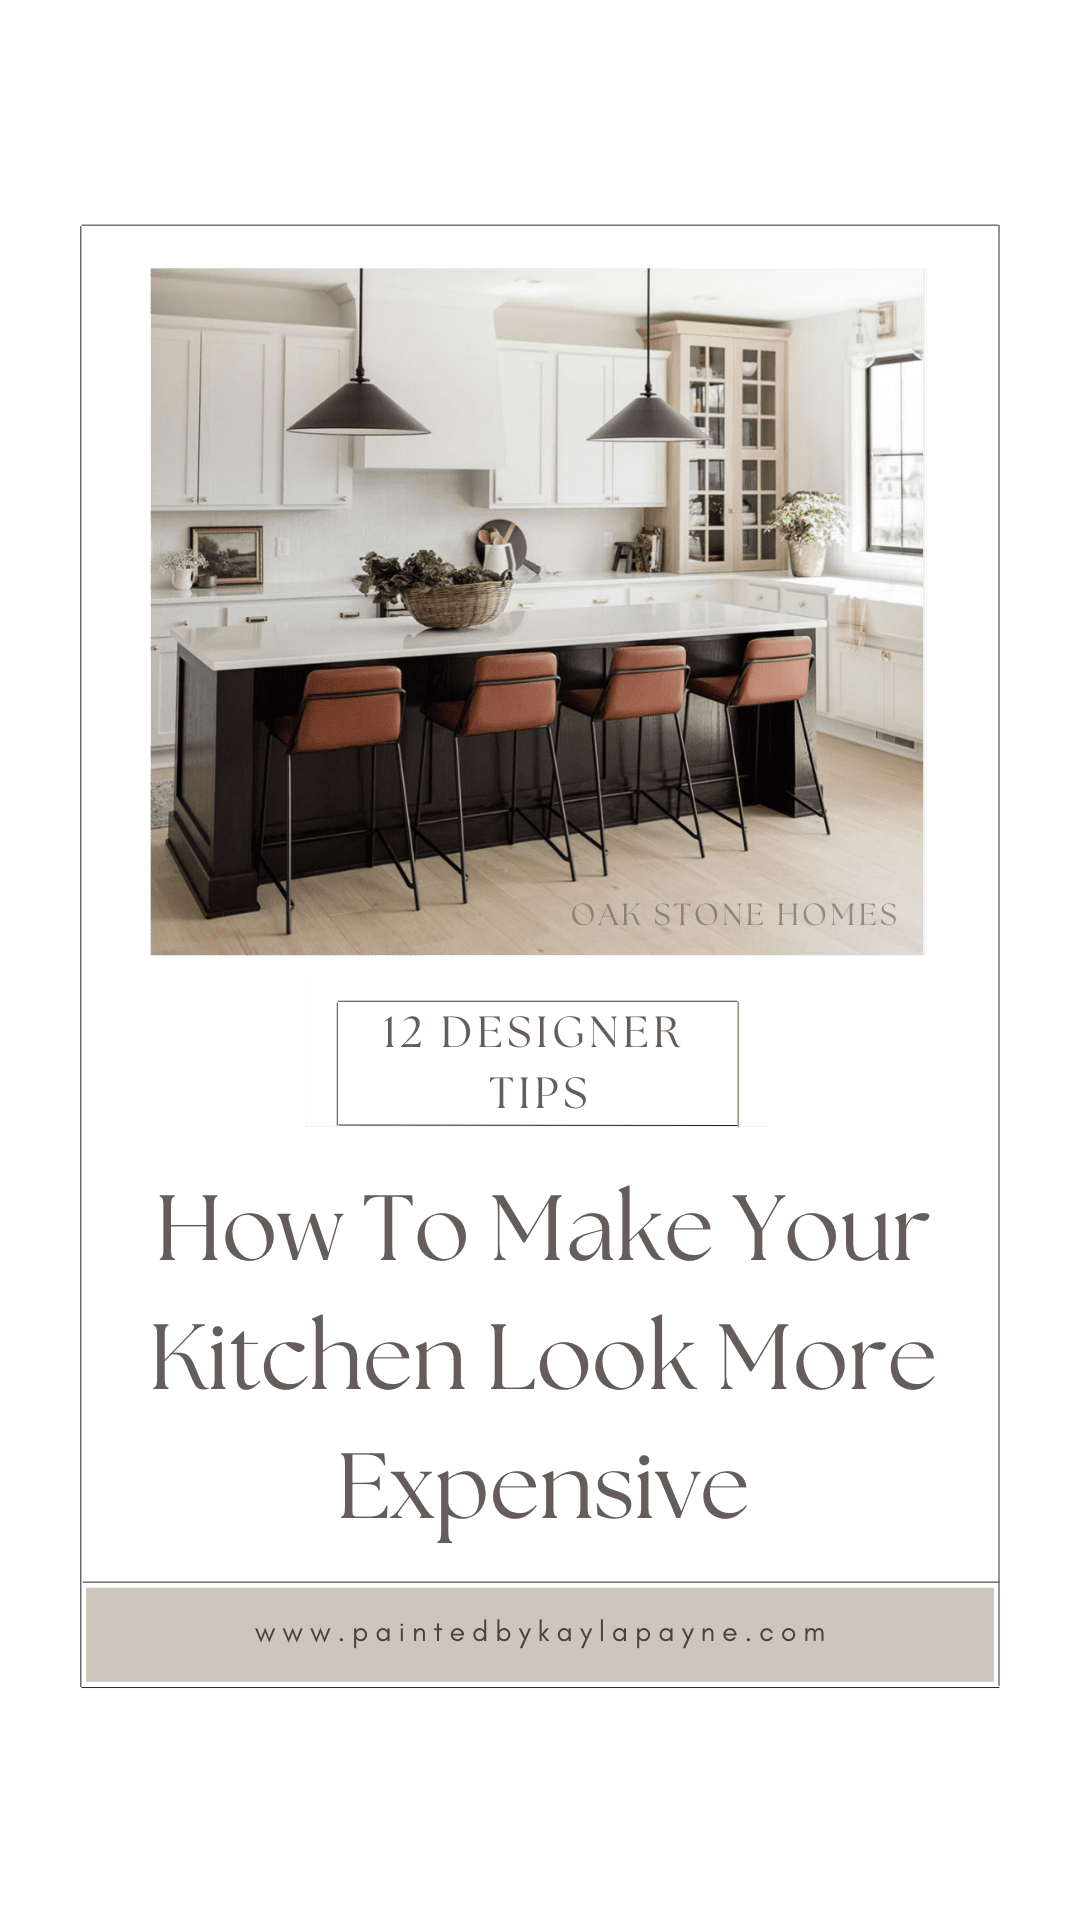 How To Make Your Kitchen Look More Expensive 1 